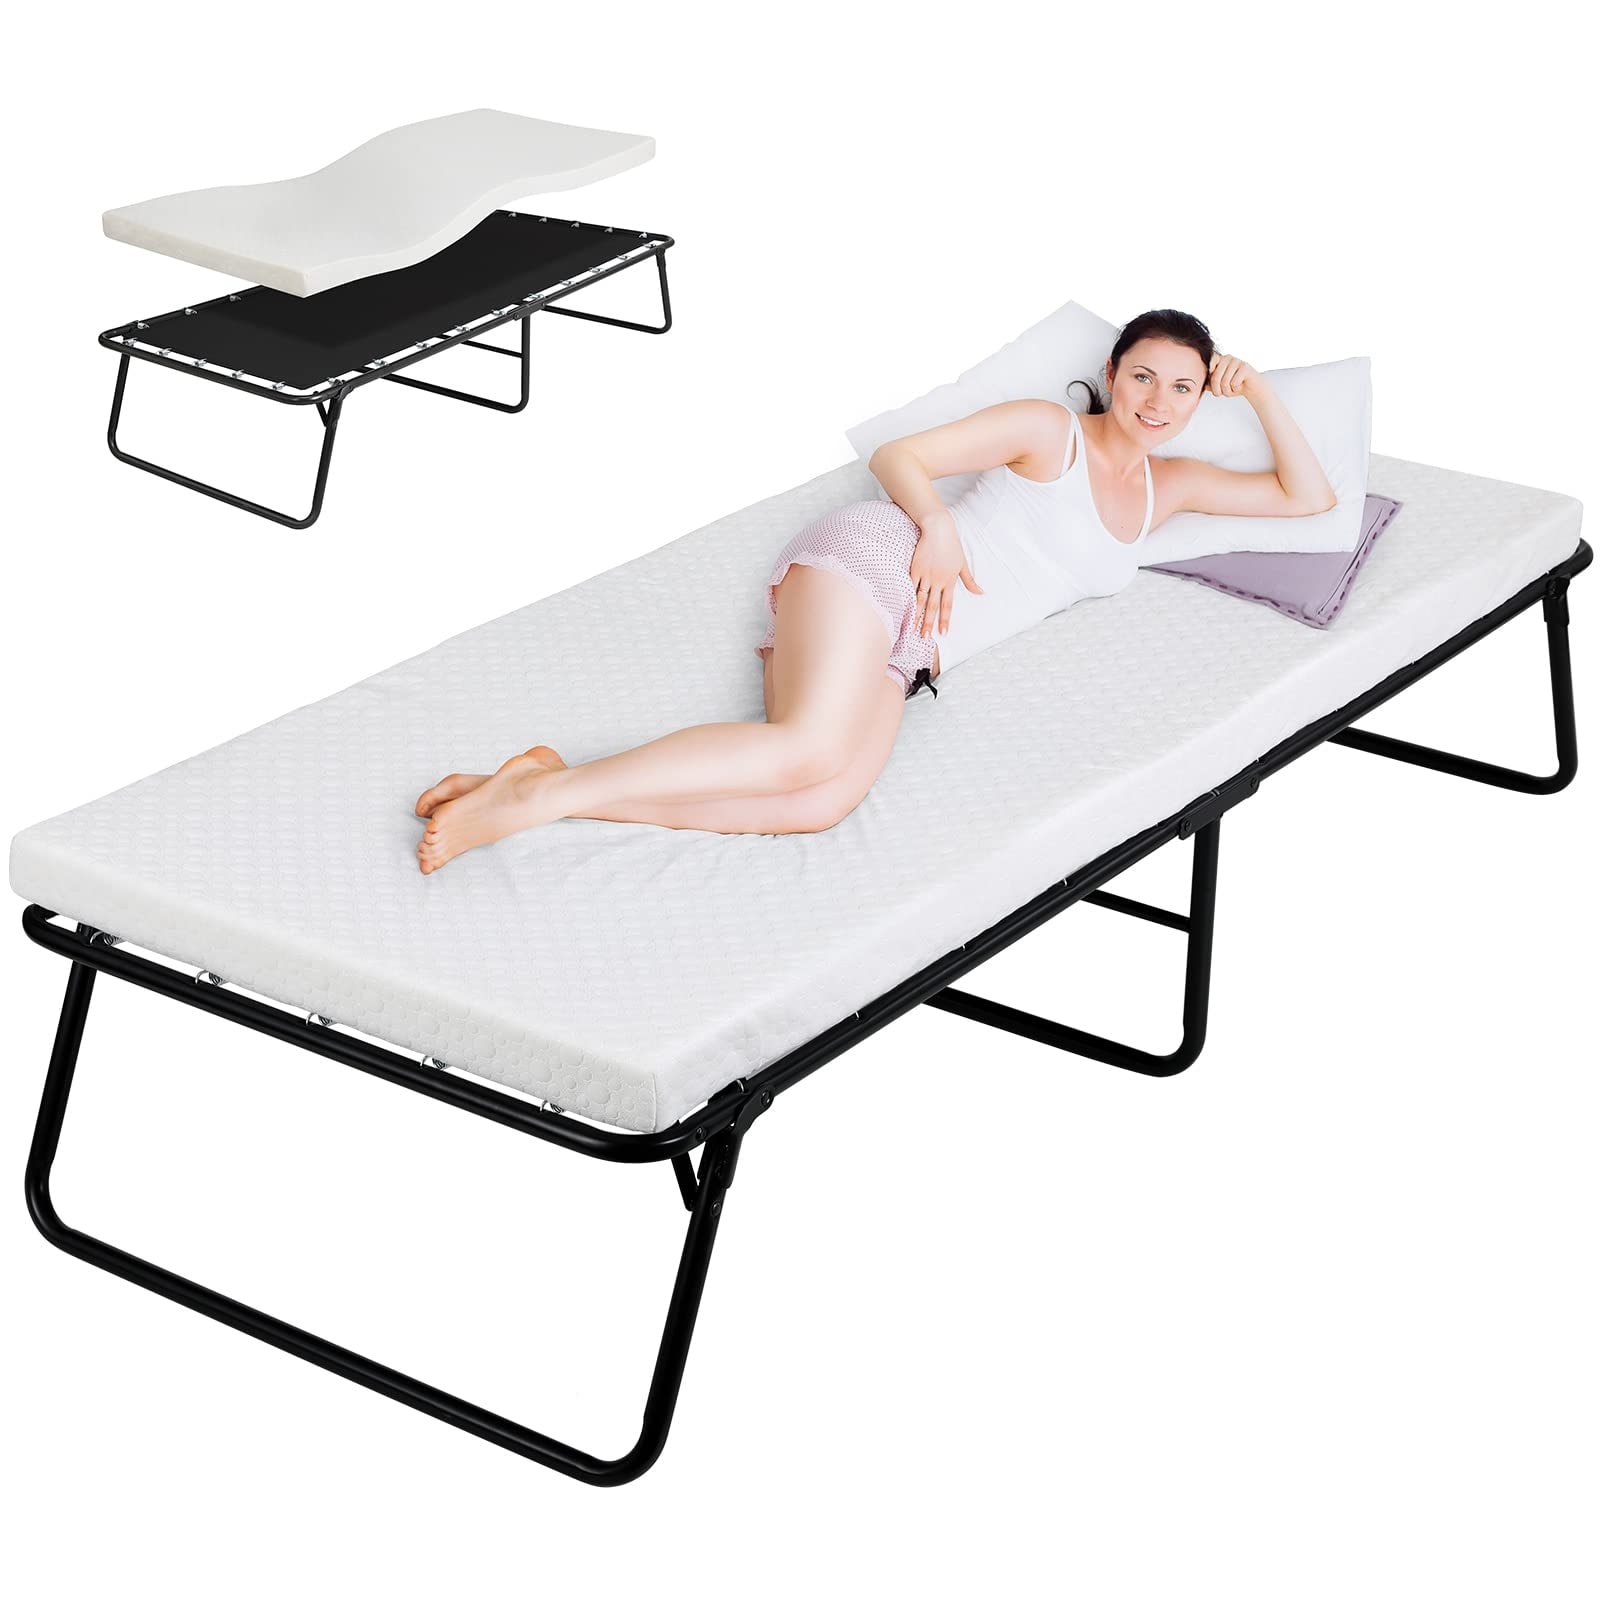 Folding Bed,Rollaway Bed with Mattress for Adults,Foldable Bed,Portable Bed,Metal Bed Frame with Memory Foam Mattress, Guest Bed